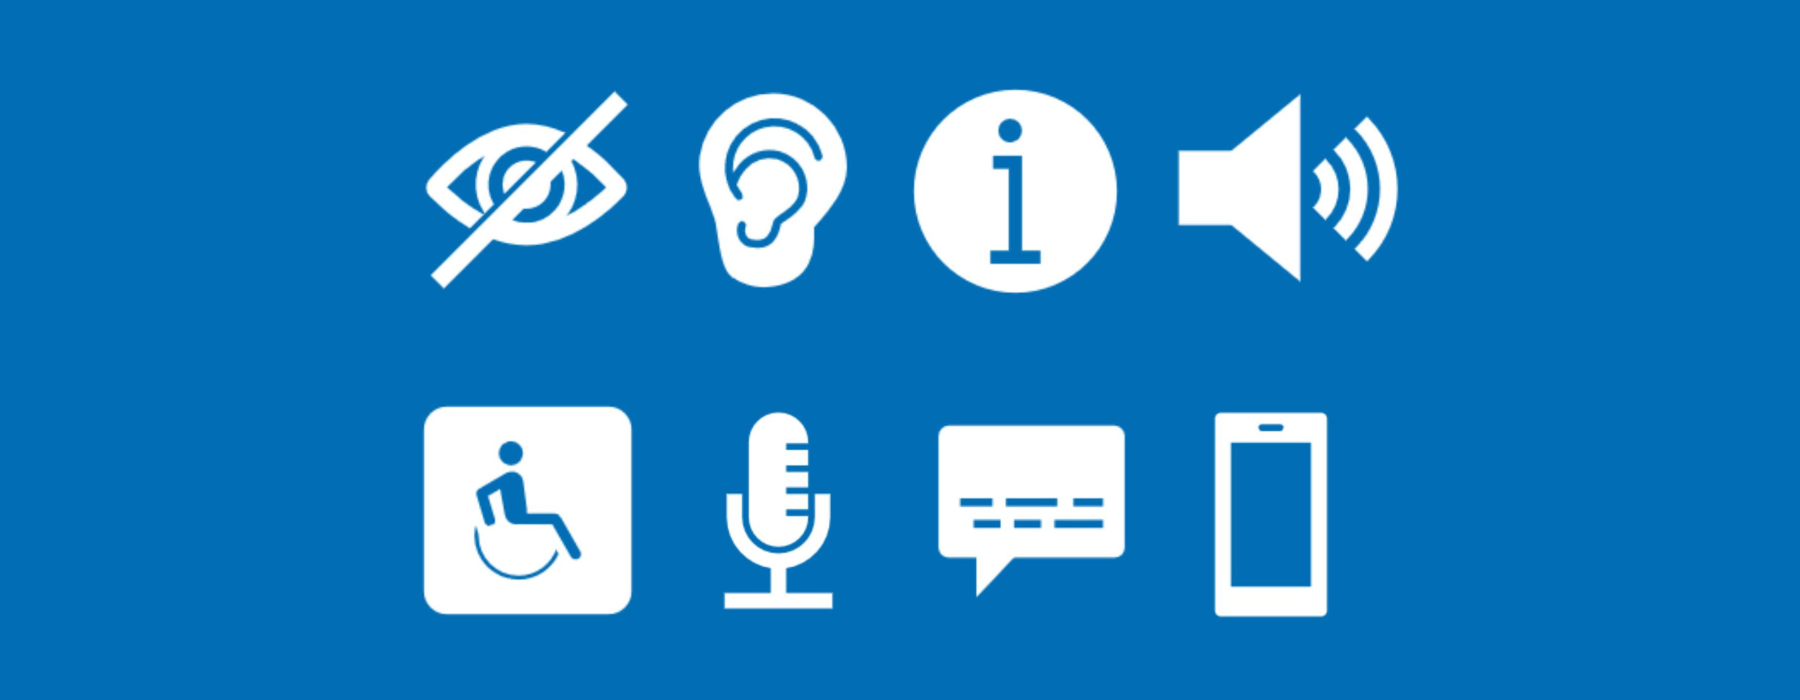 White accessibility icons on a blue background, an eye with a slash, an ear, a circle with an i in it, a speaker, a wheelchair, a microphone, a text bubble, and a smart phone